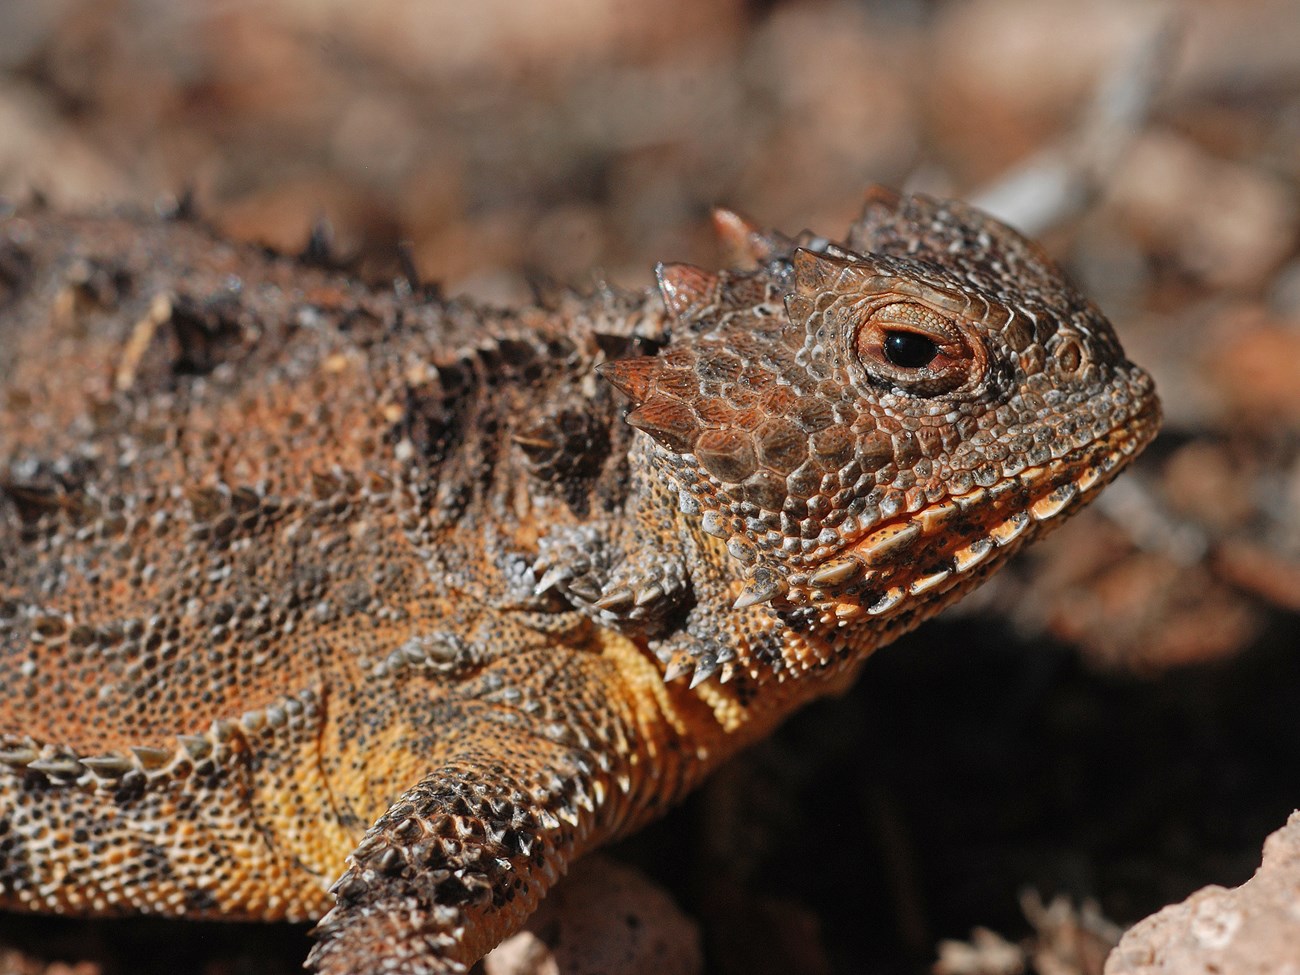 closeup of the face of a colorful lizard with horns